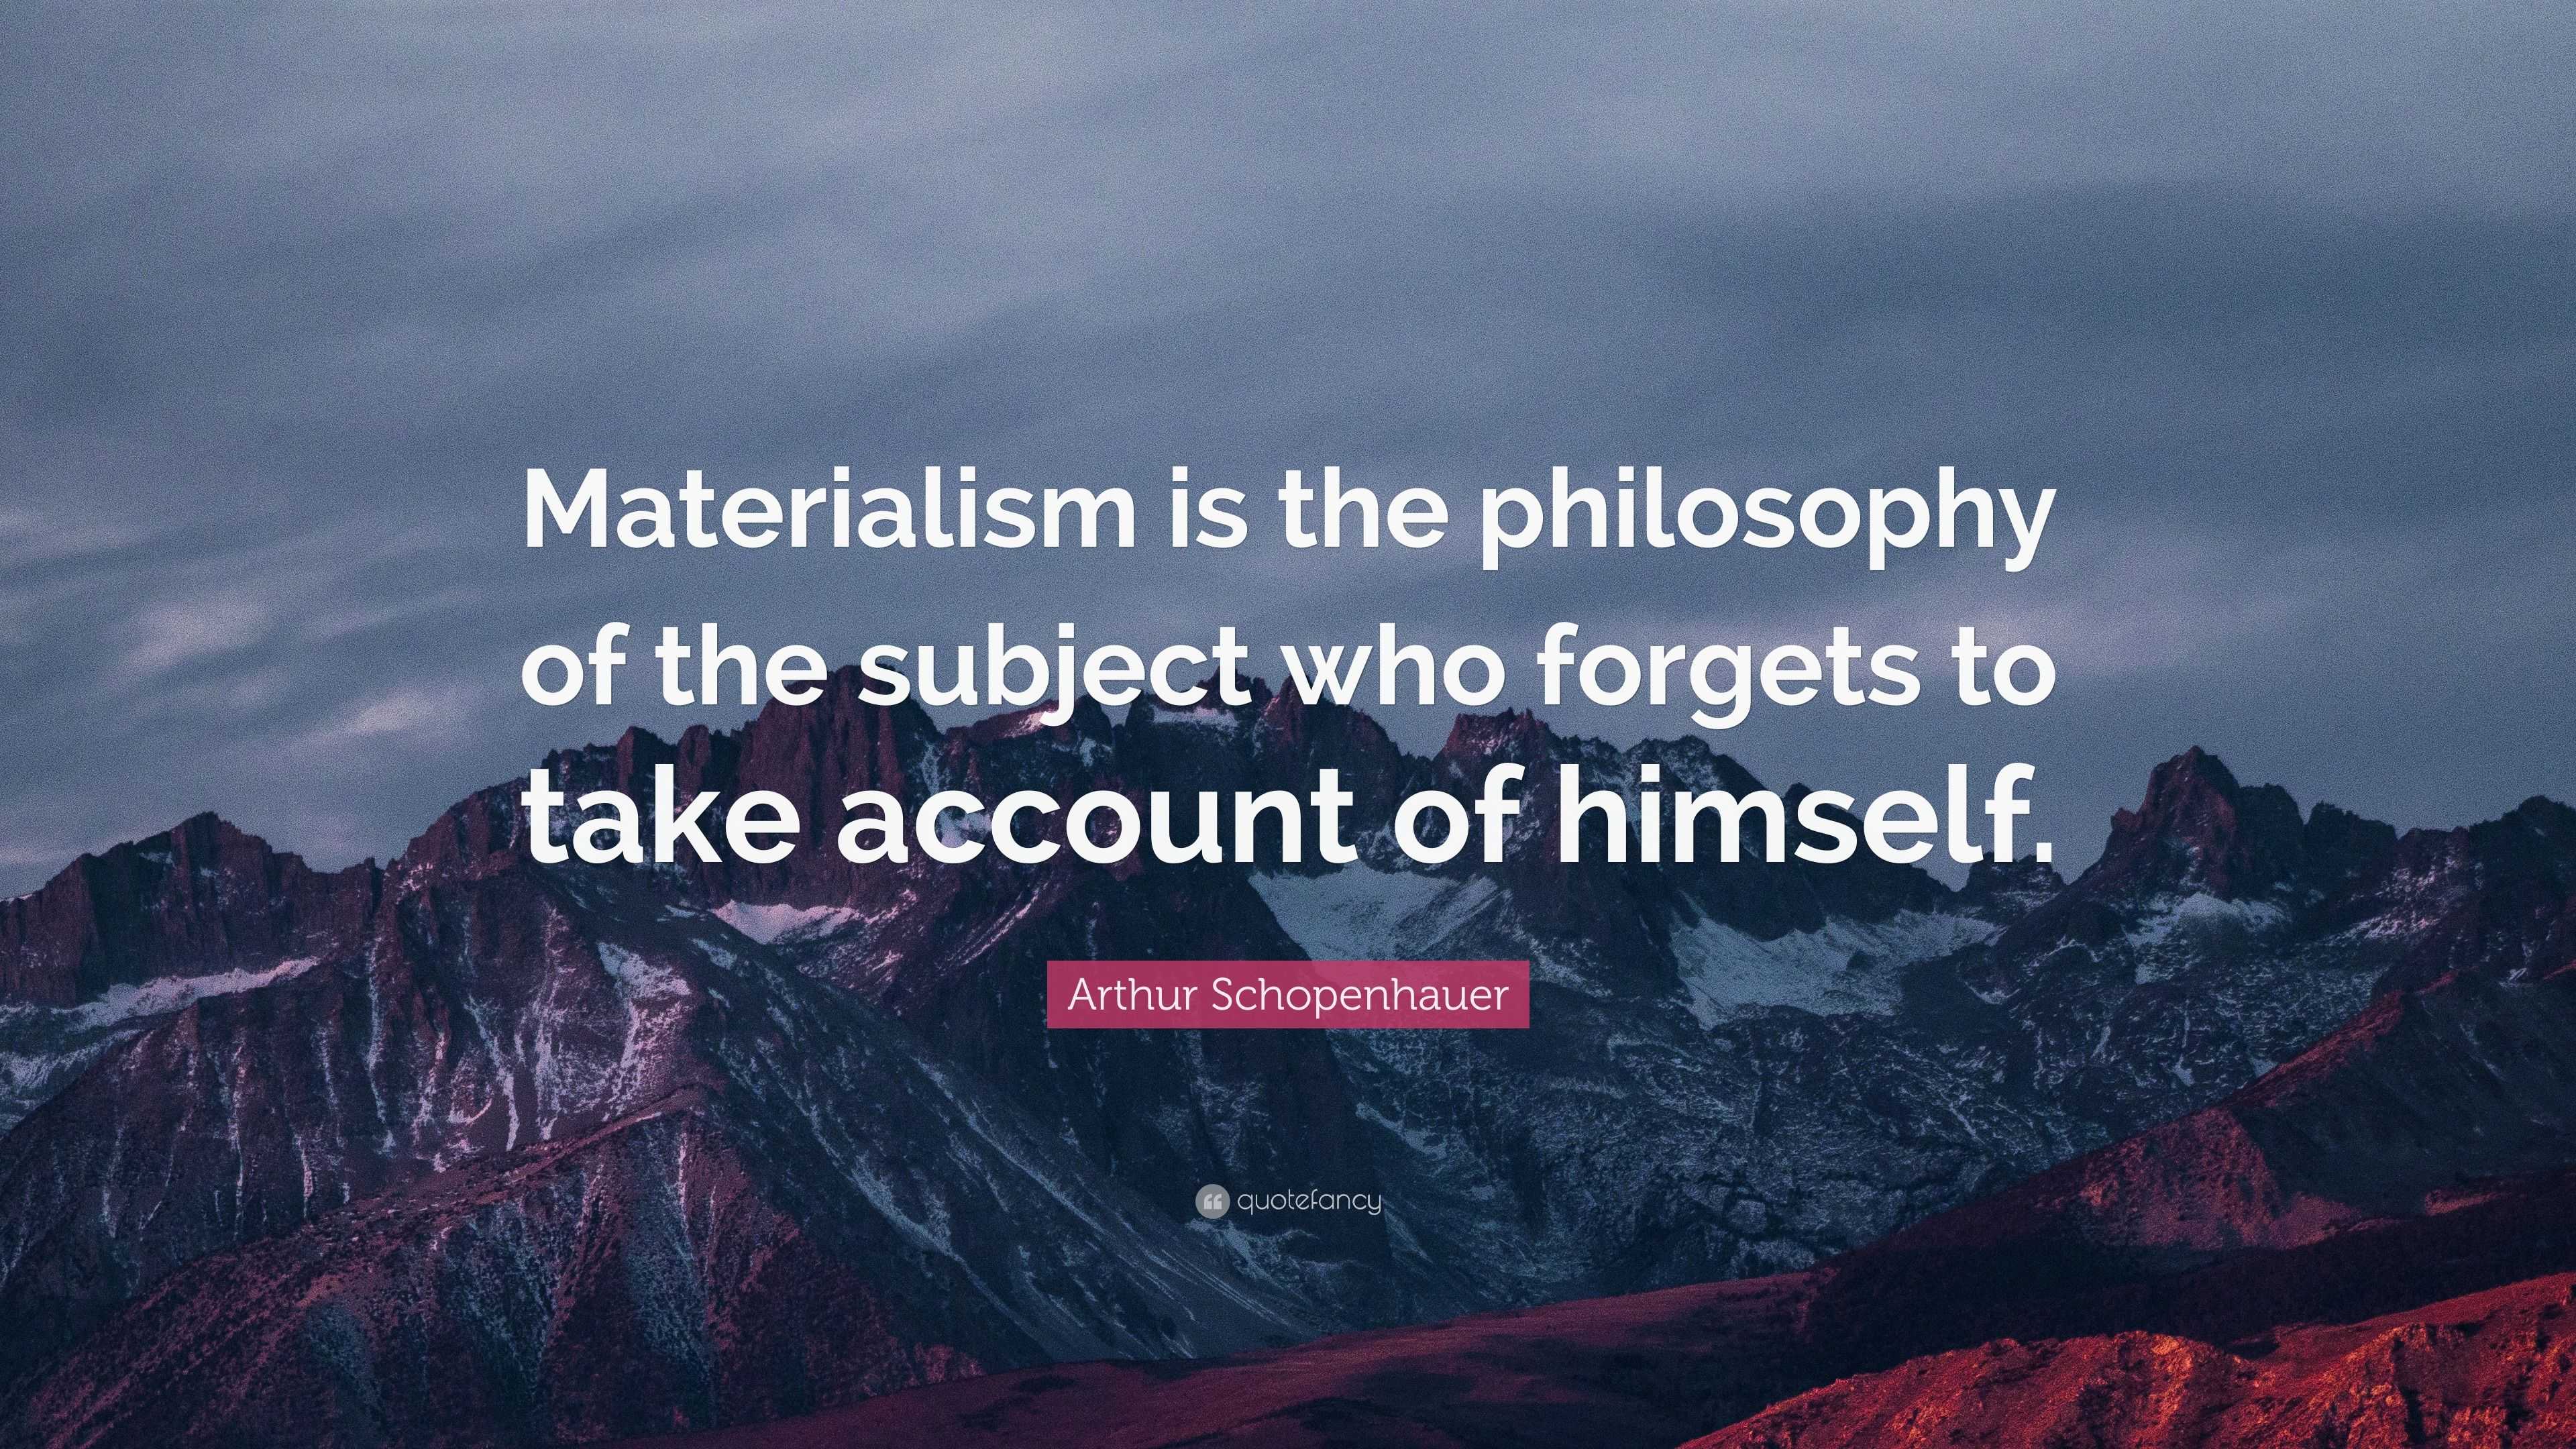 materialism is good essay